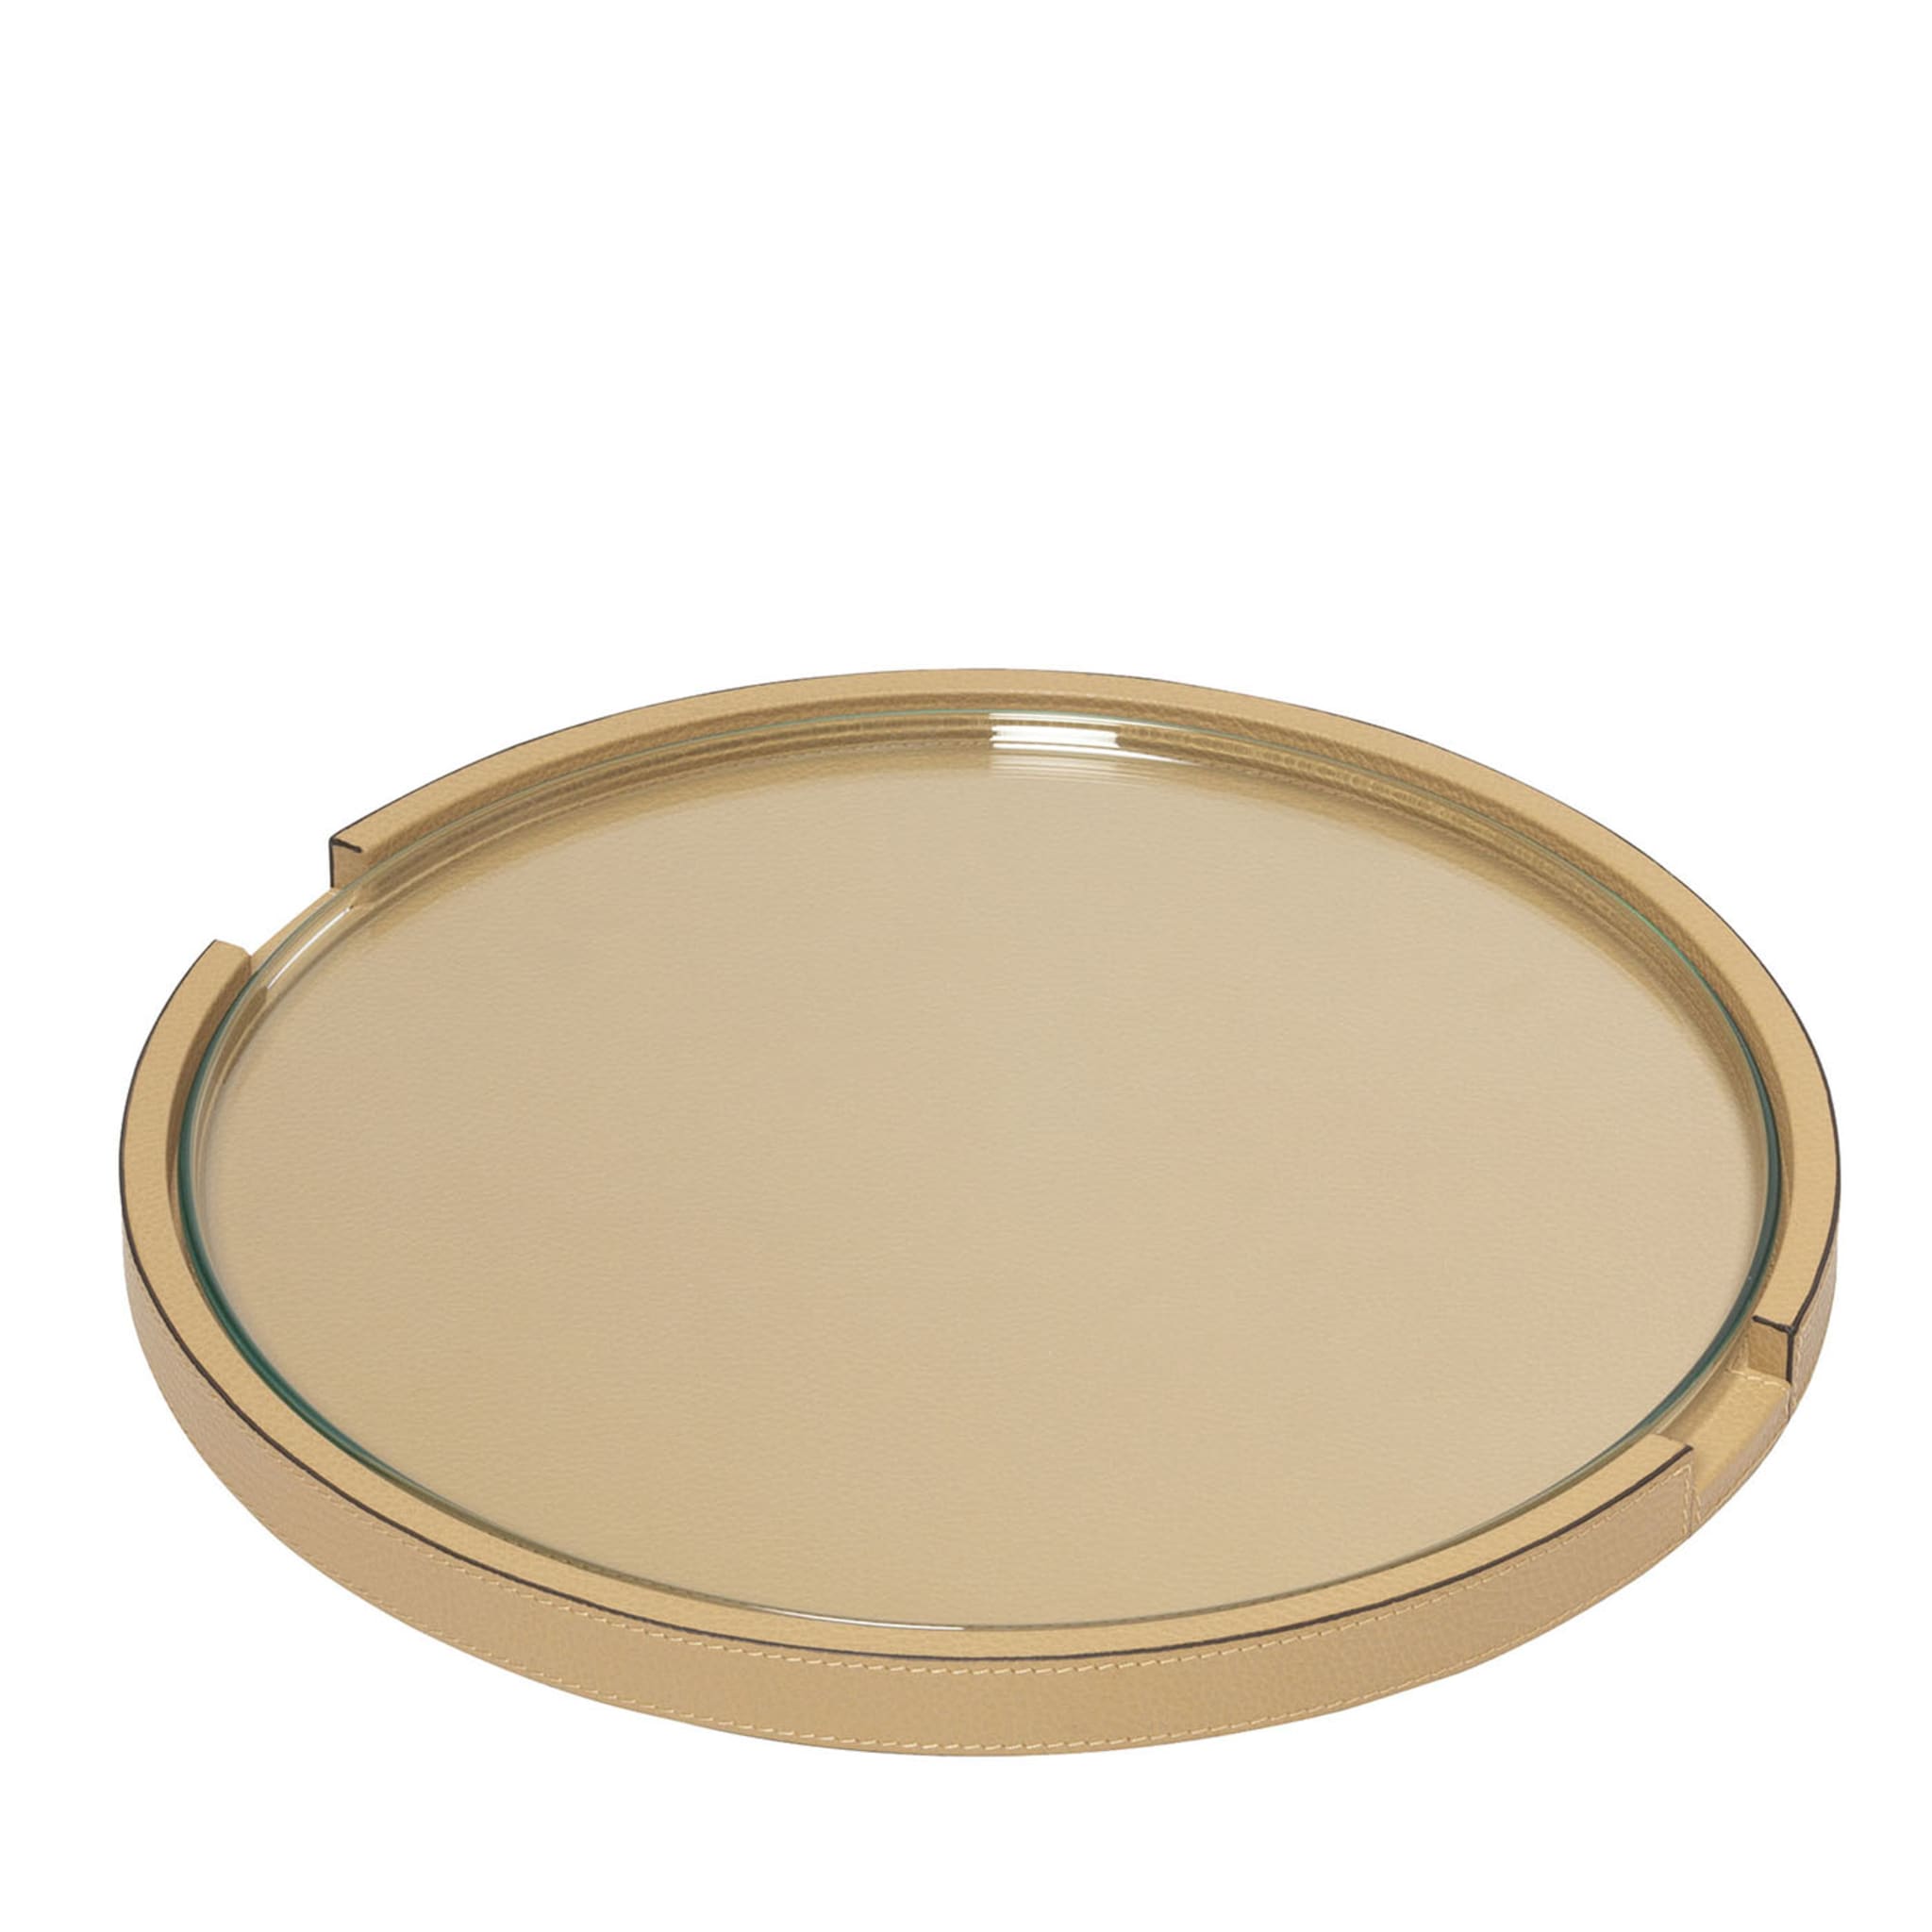 Gourmet Round Serving Tray #1 - Main view